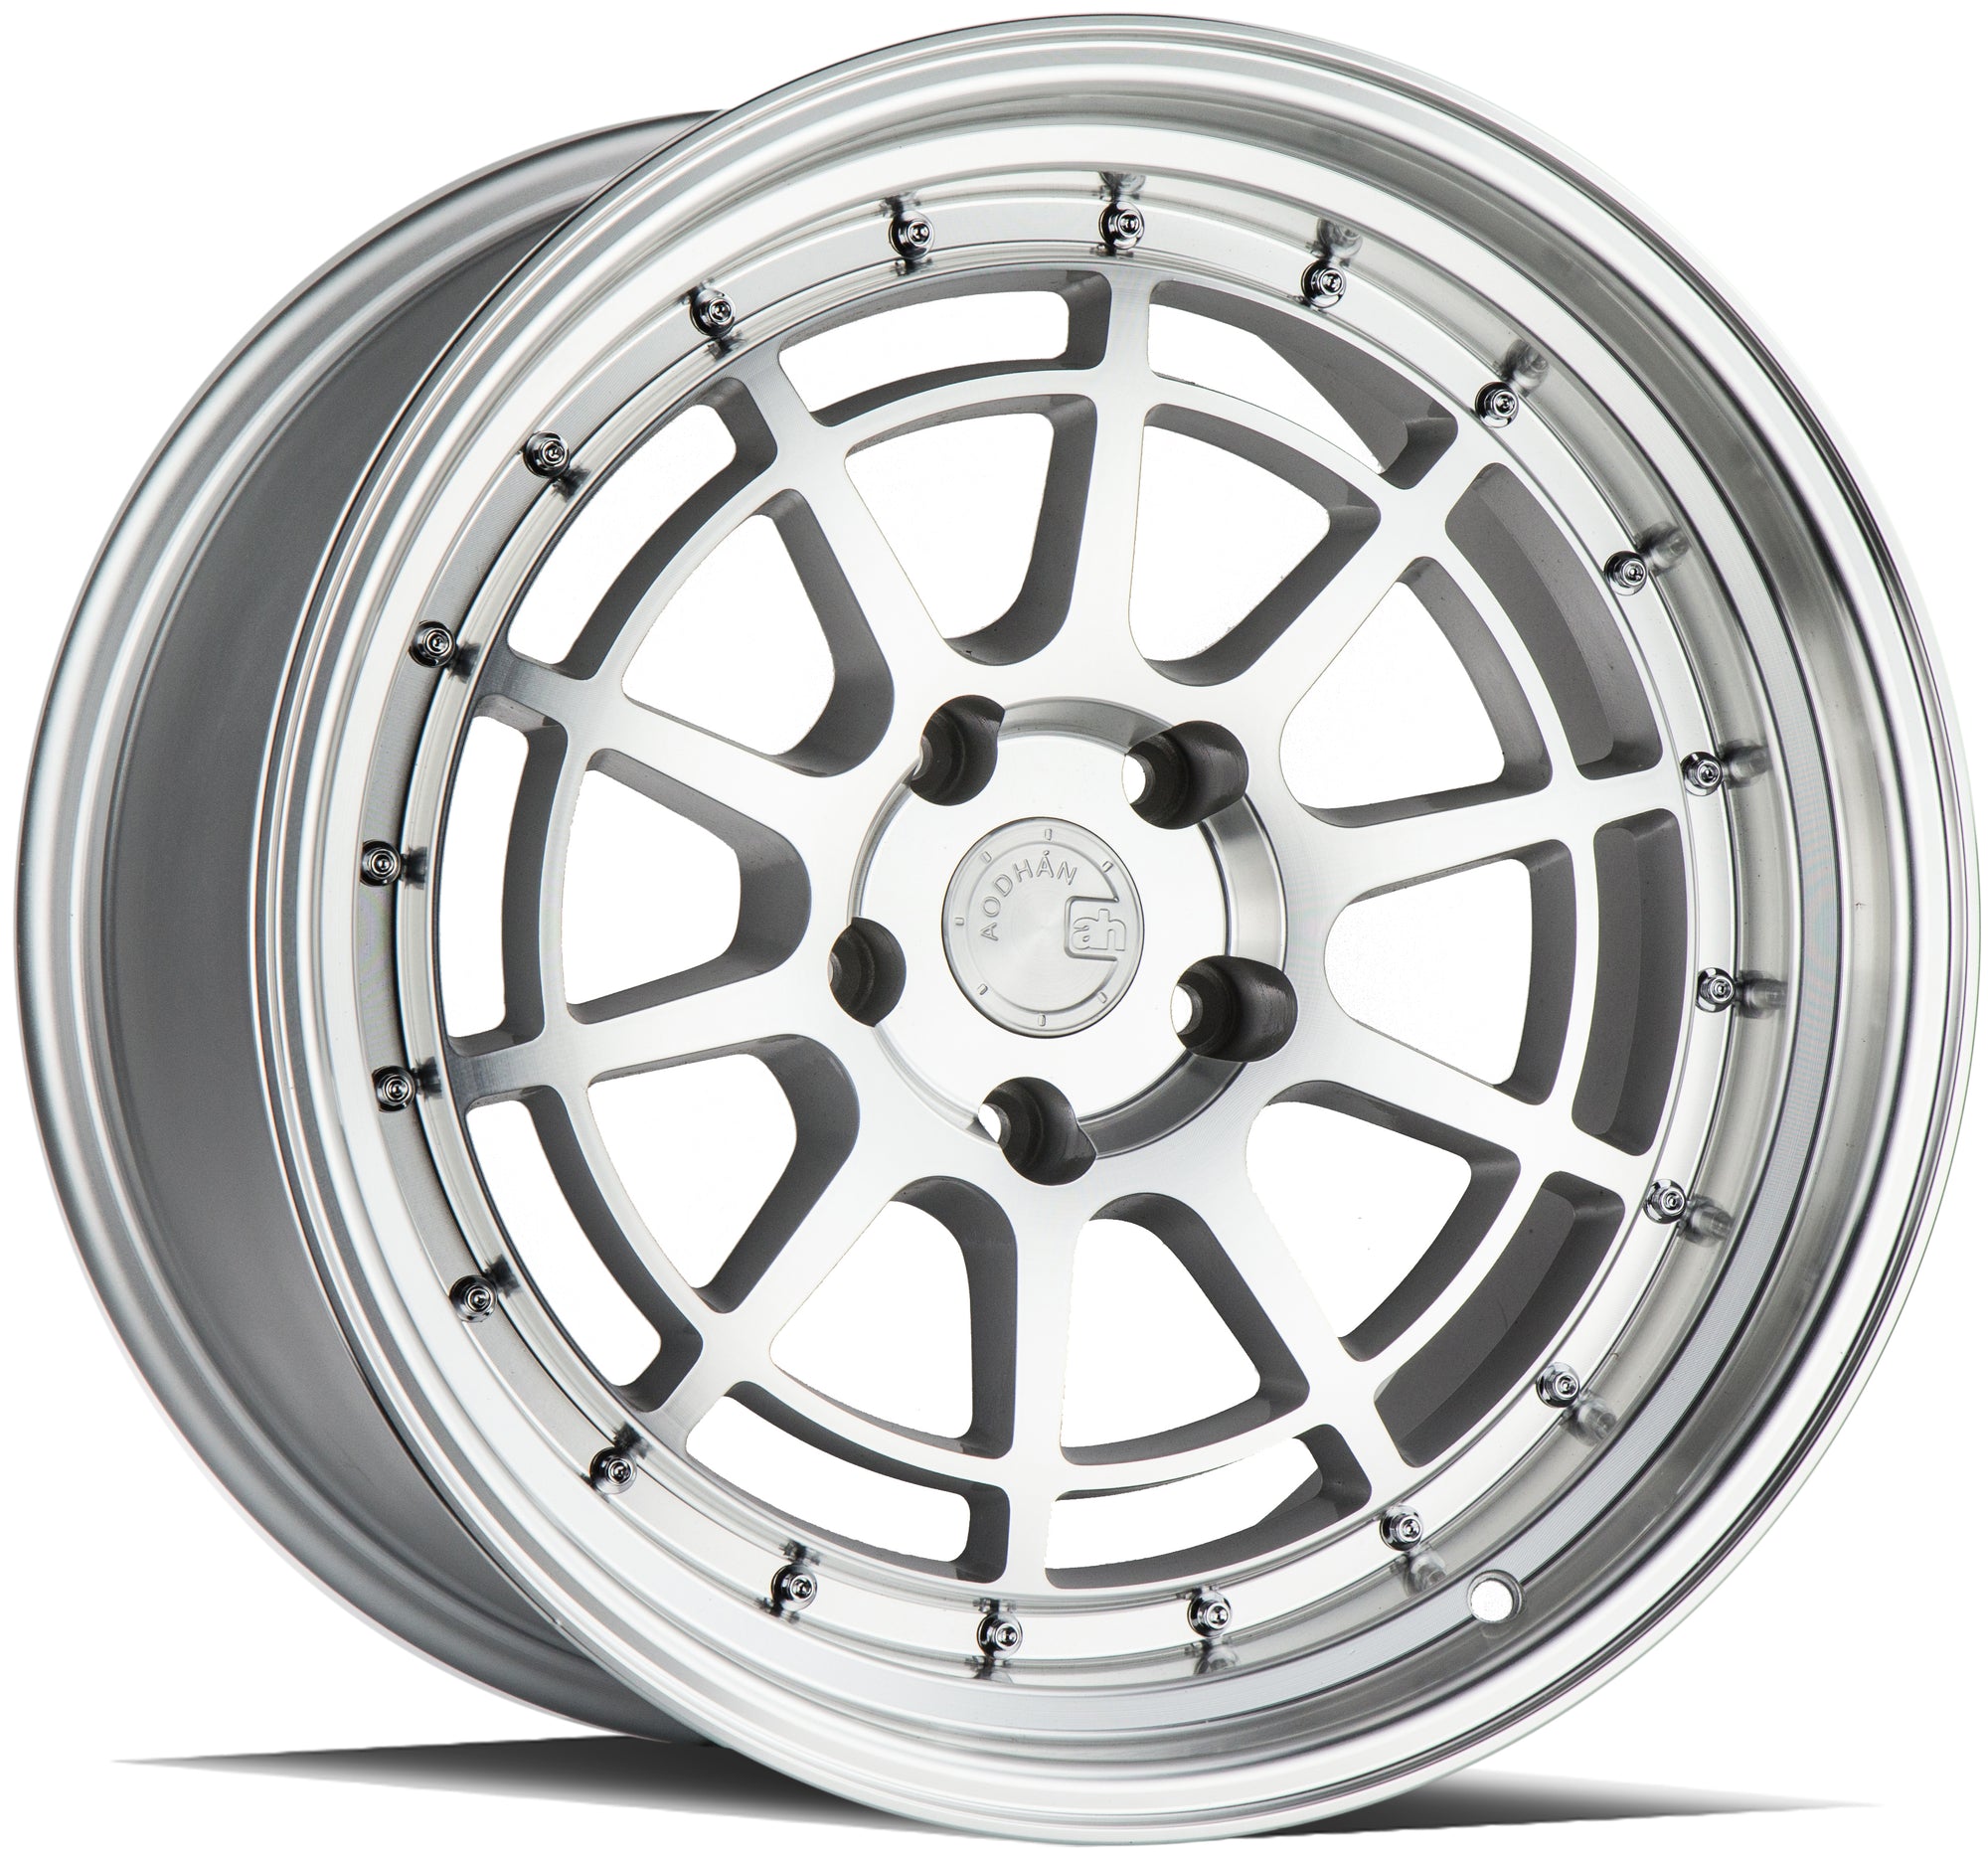 Aodhan AH04 18x10.5 5x114.3 +15 Silver Machined Face And Lip